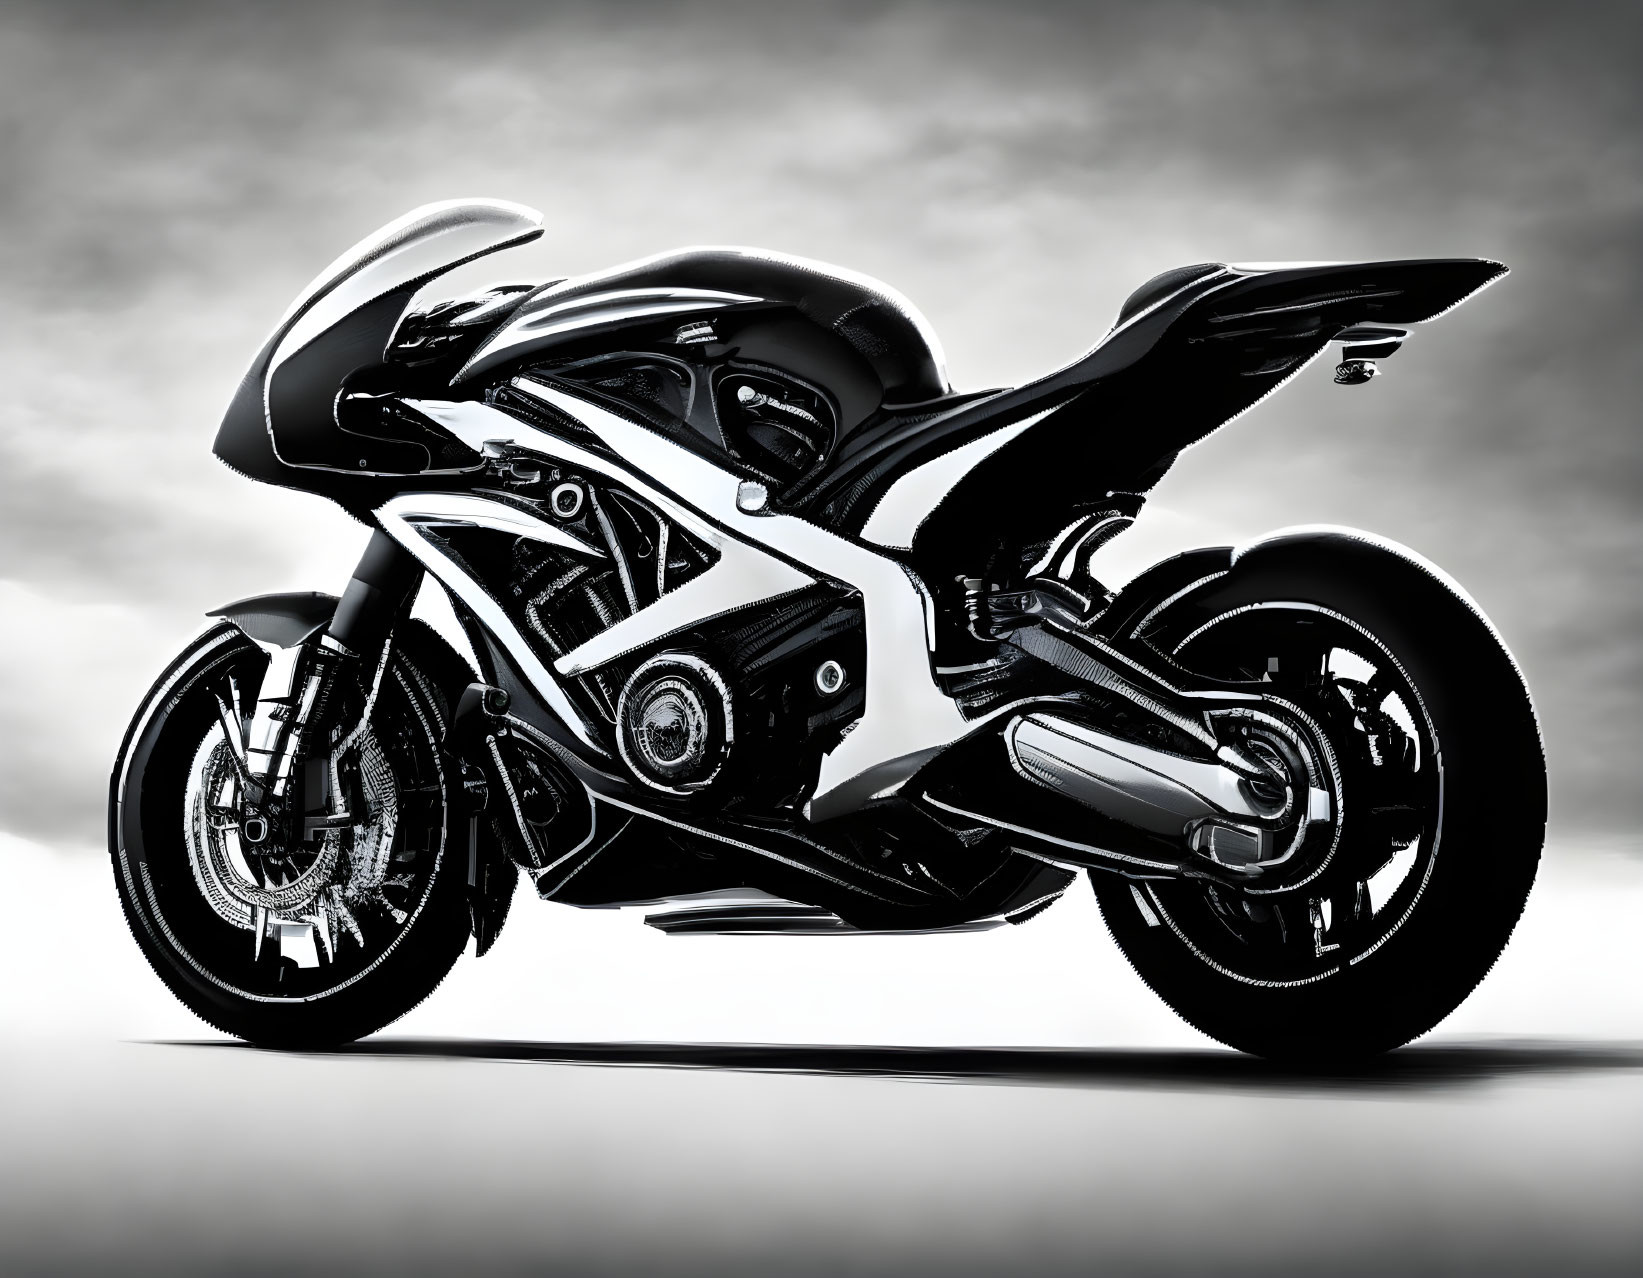 Sleek Black Sport Motorcycle with Exposed Frame on Cloudy Sky Background